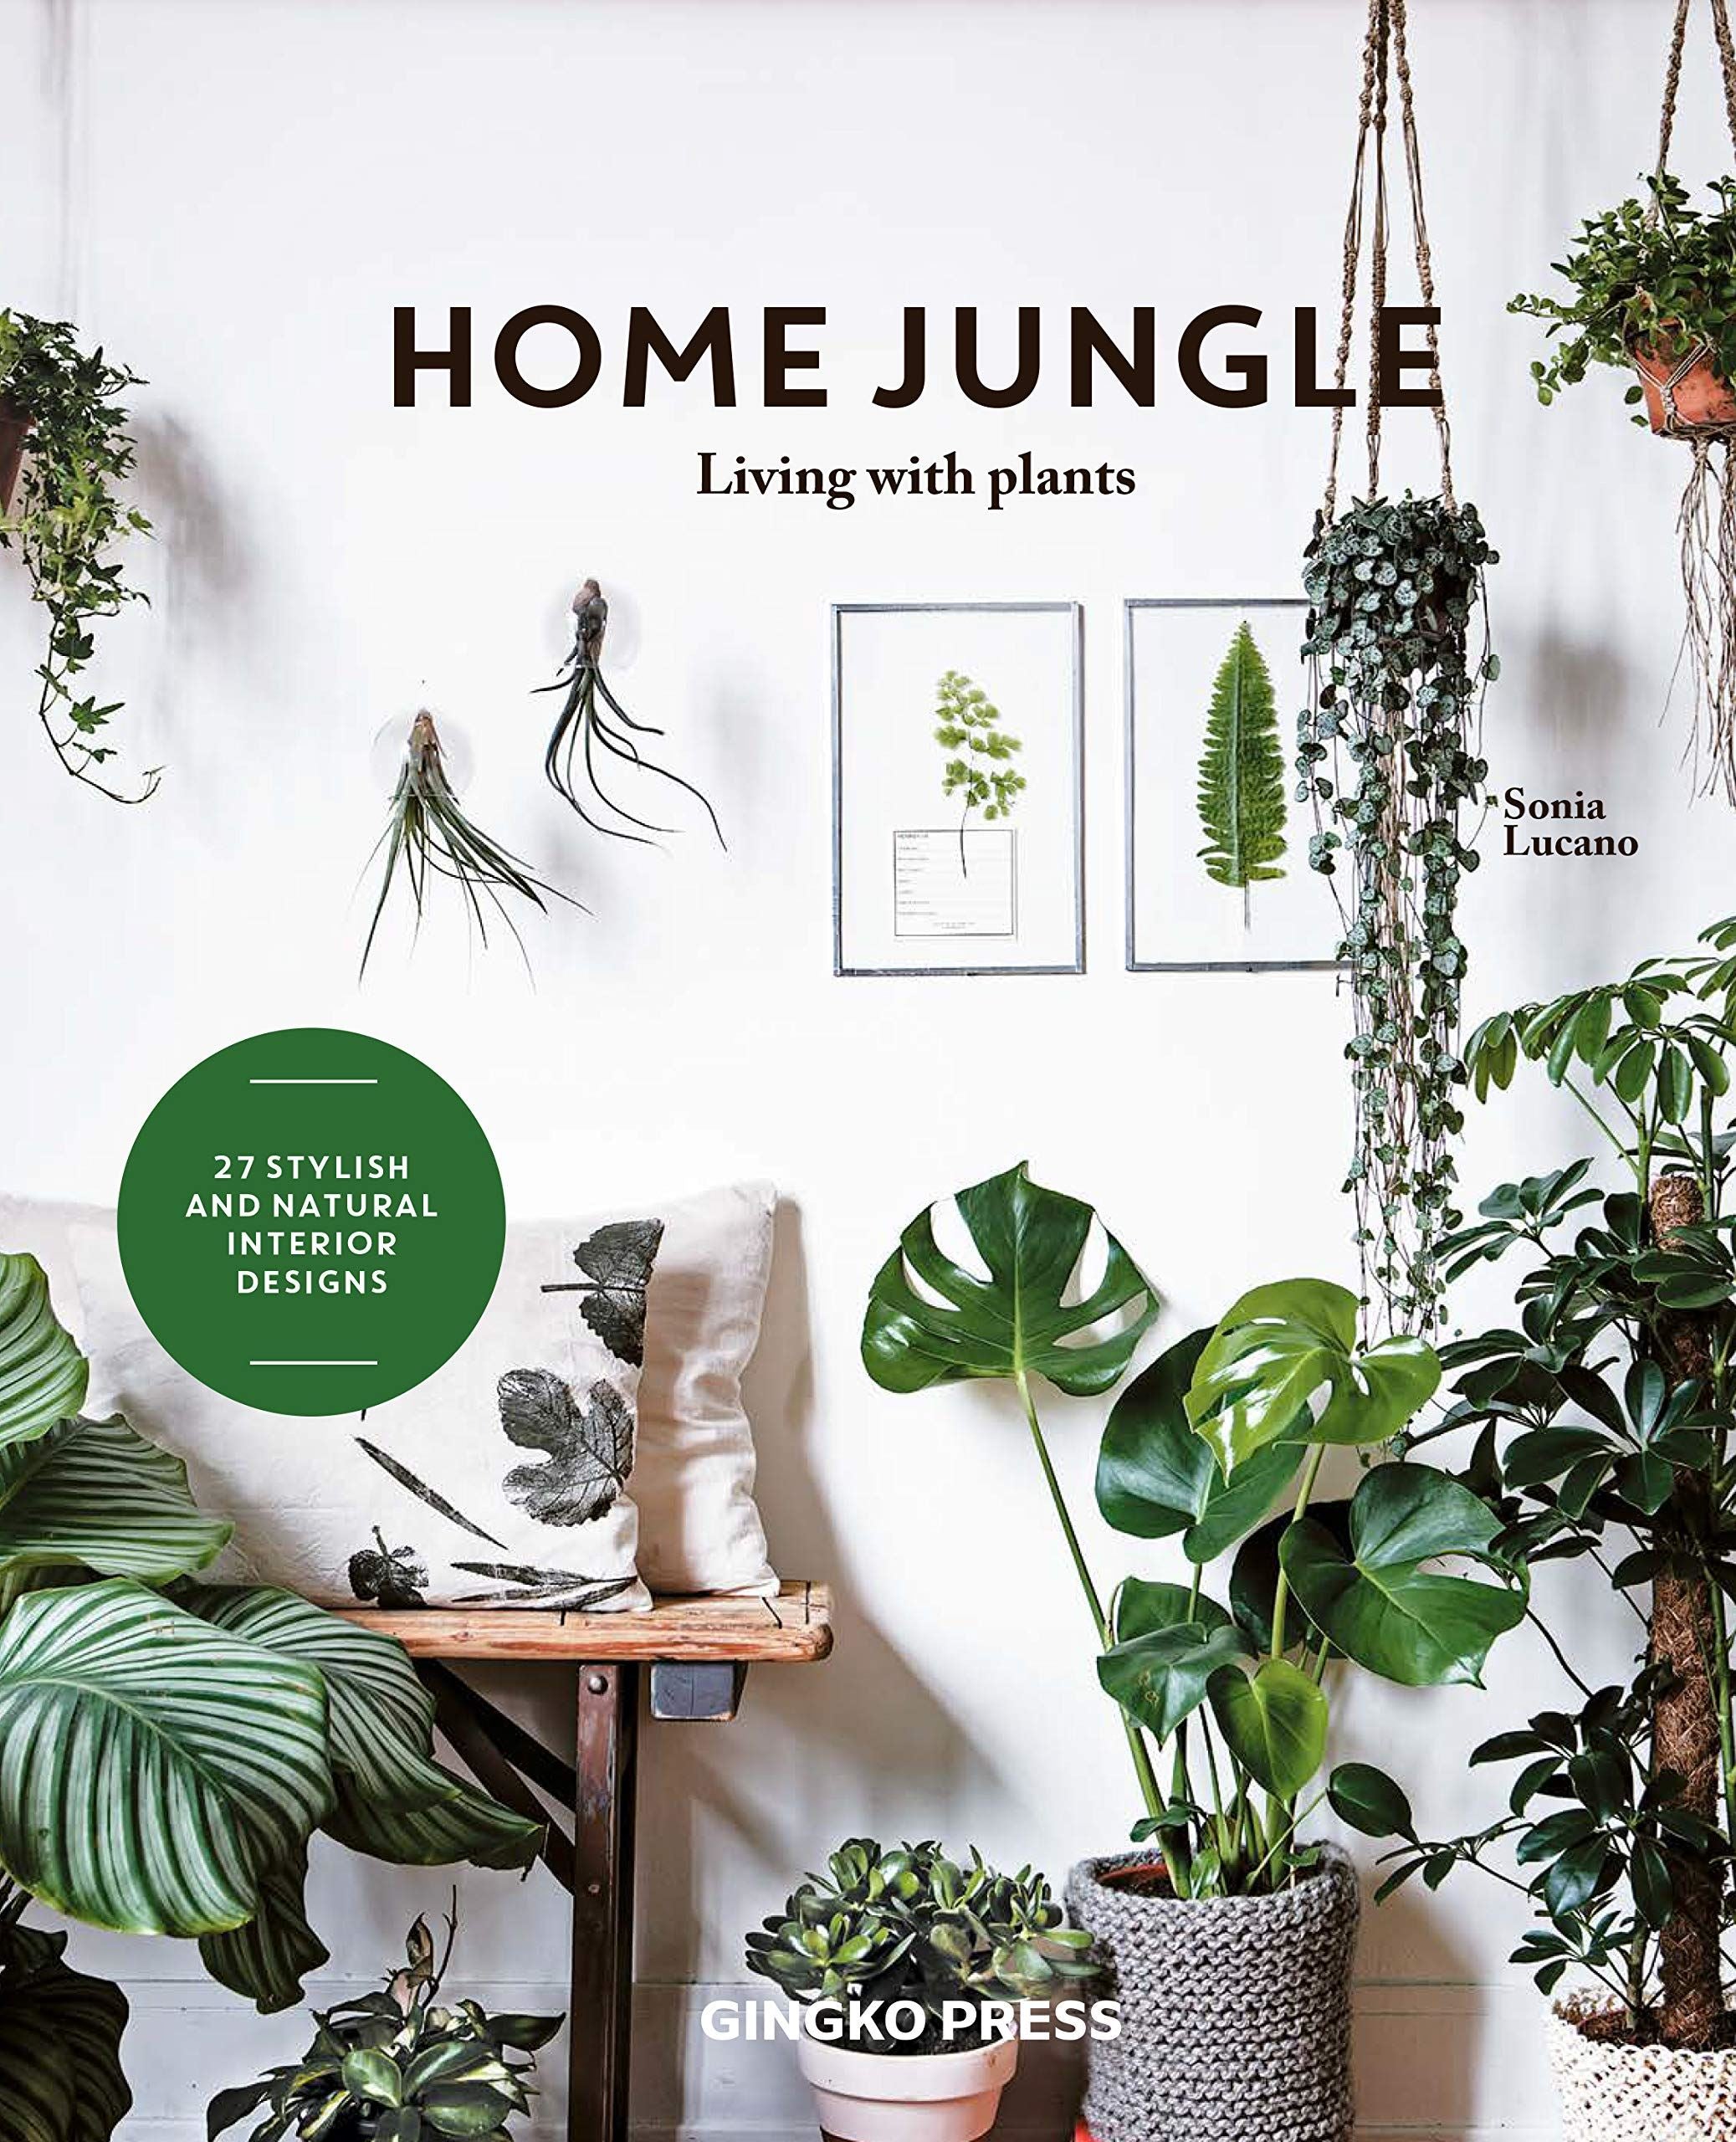 Home Jungle: Decorating Your Home With Plants Book – Uneeka